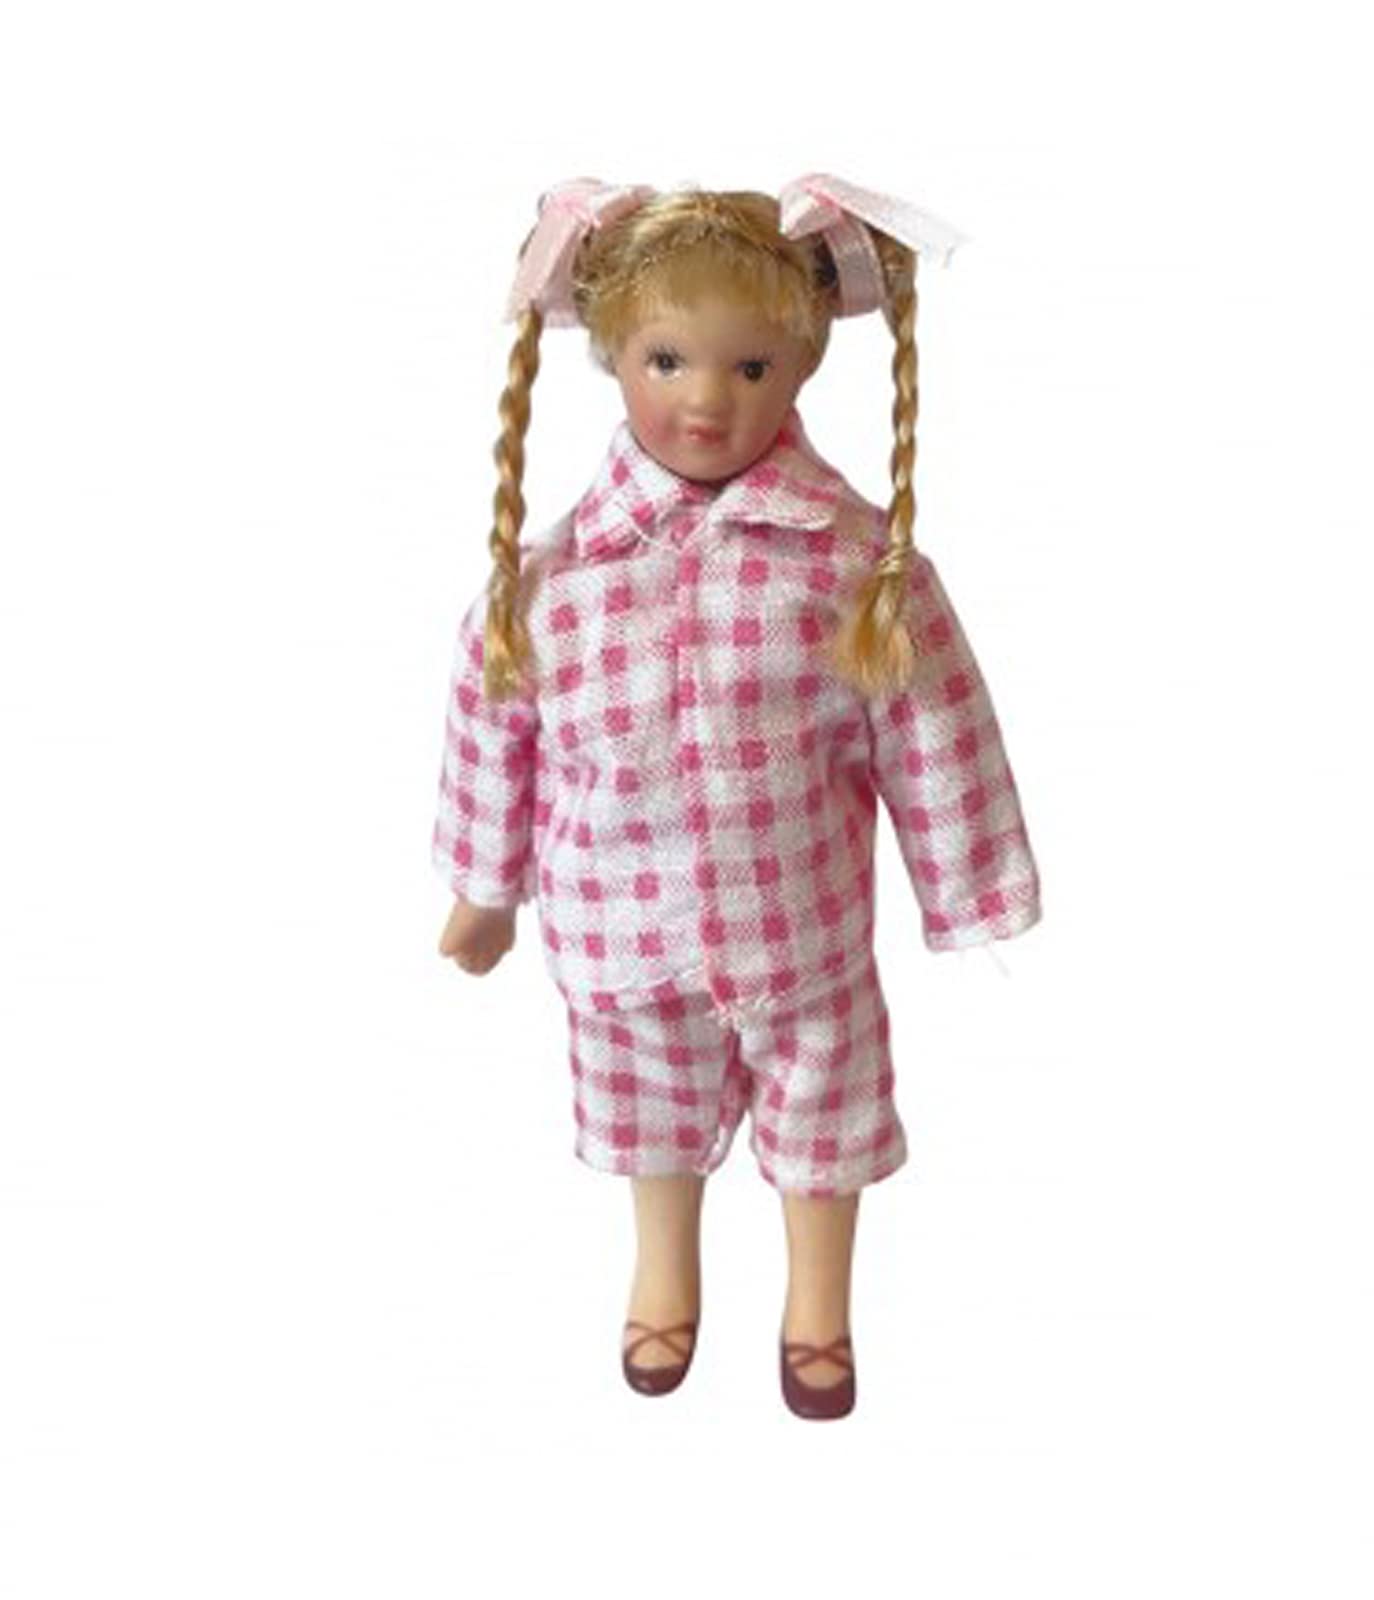 Melody Jane Dolls Houses Dollhouse Little Girl in Pink & White Pyjamas Porcelain 1:12 Scale People